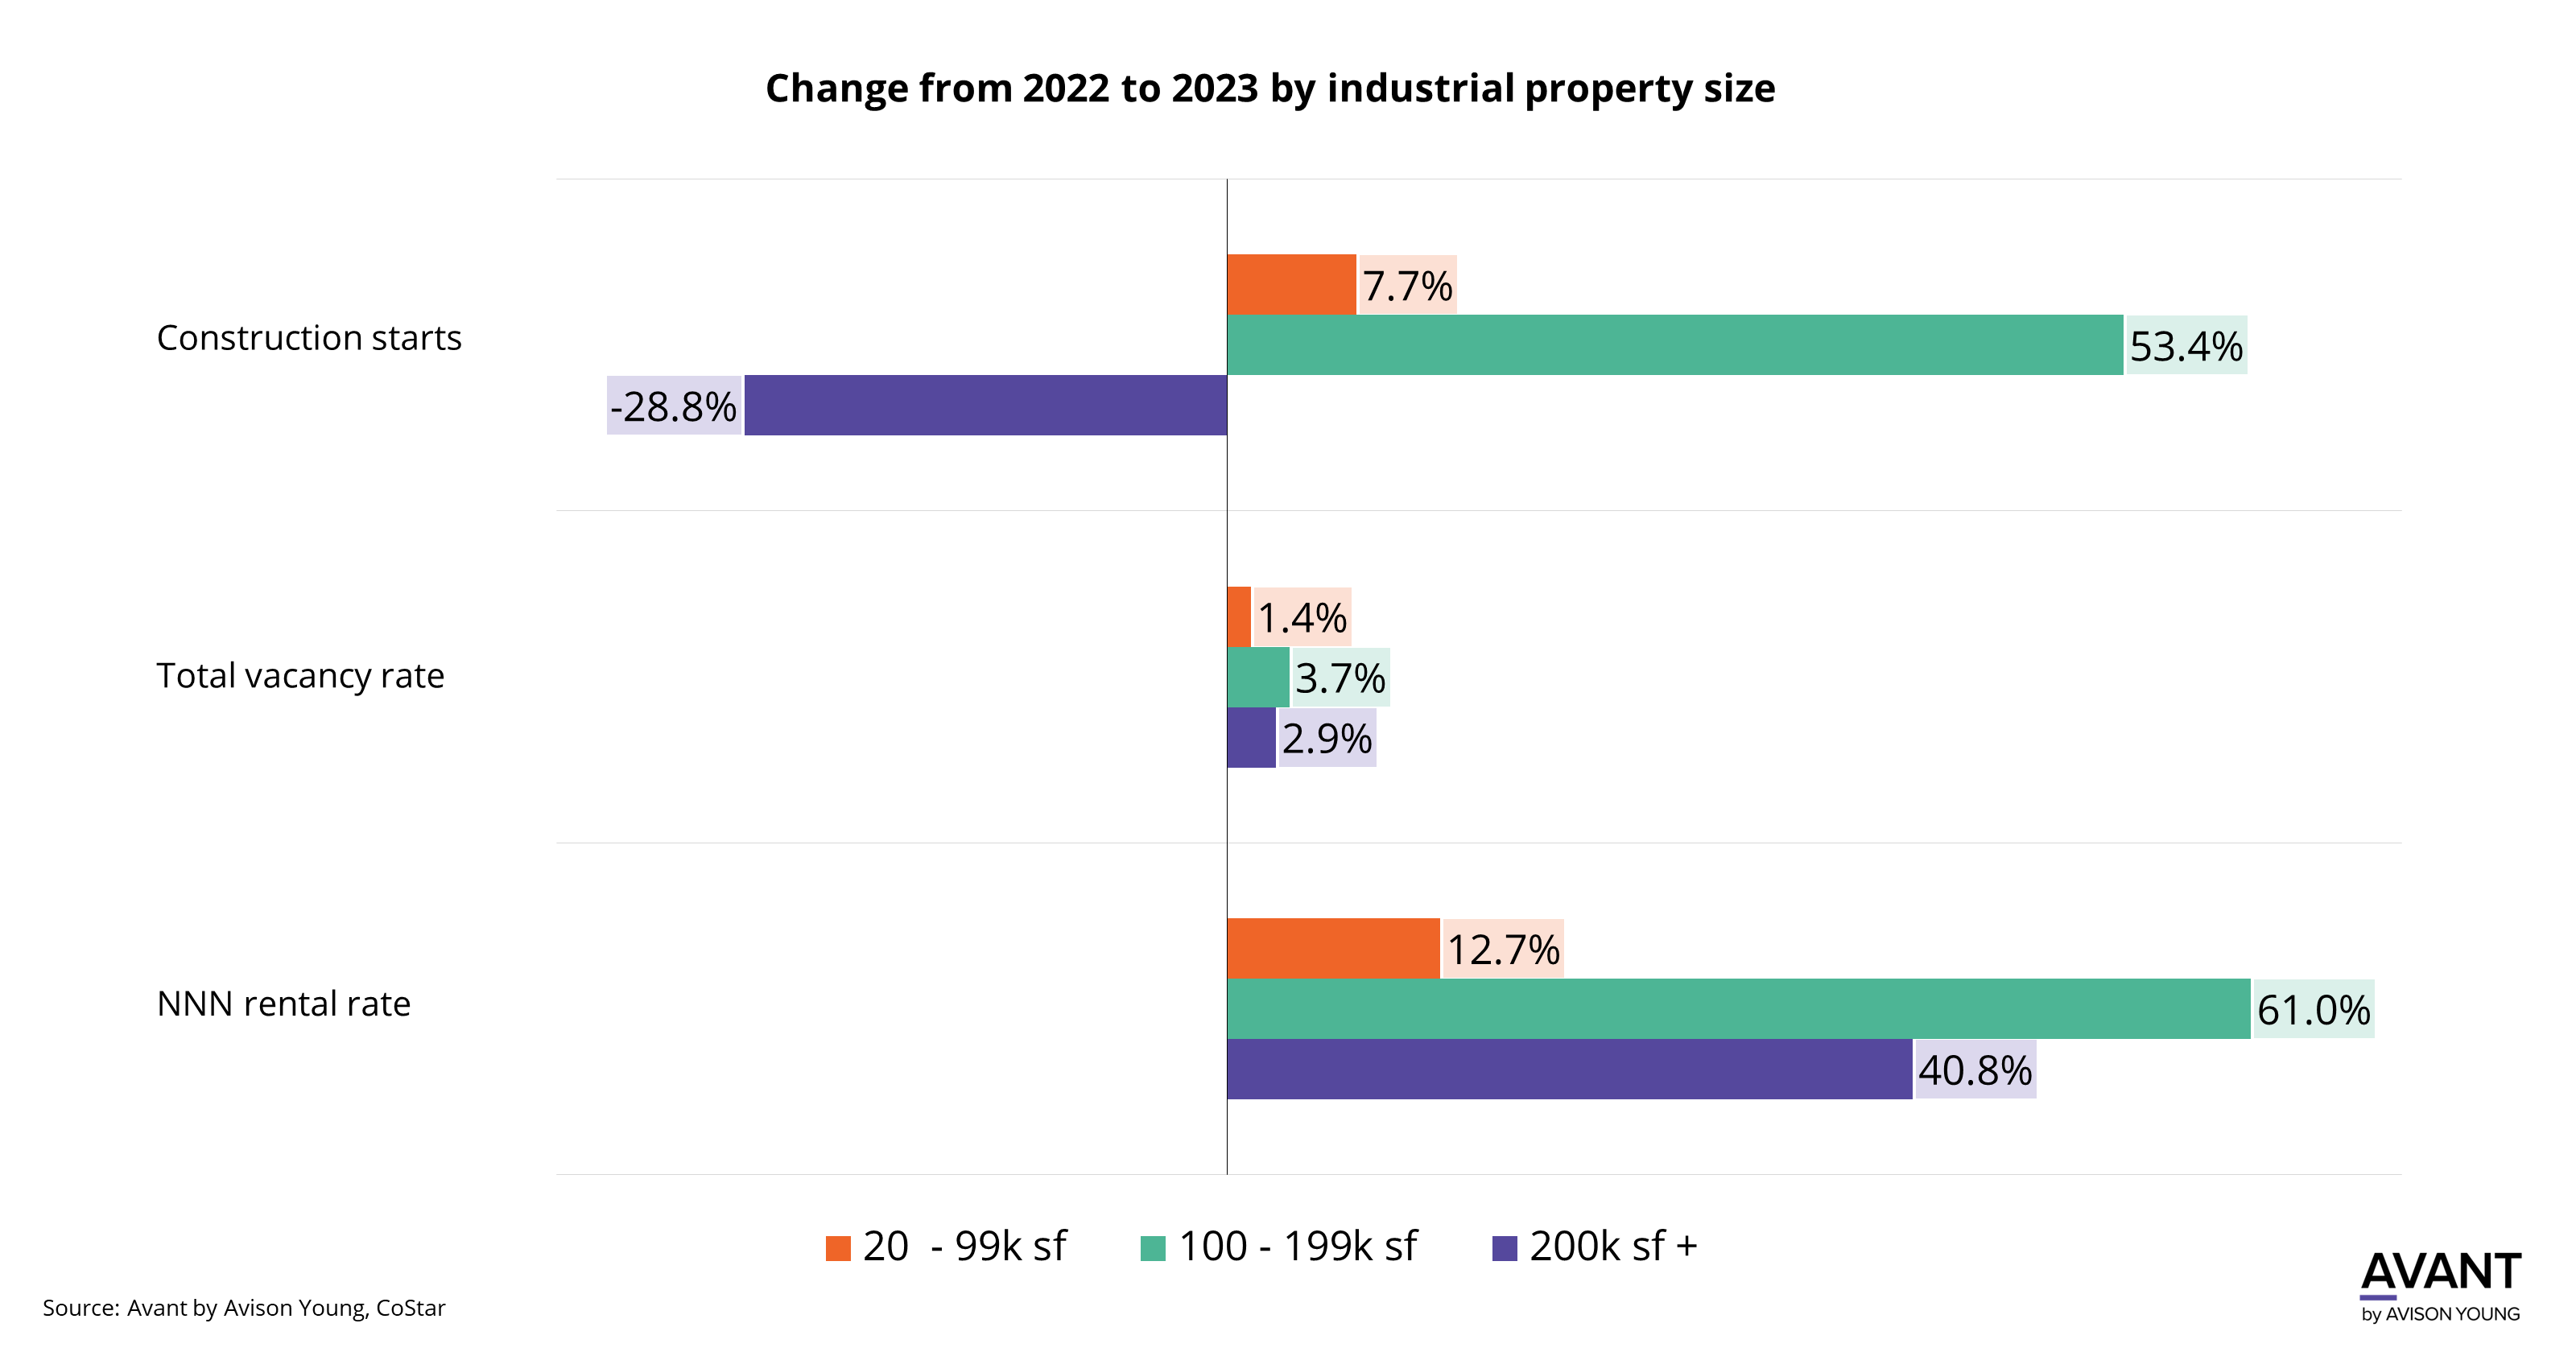 Chart depicting how while the trend of increased industrial demand for properties smaller than 200k sf is real, in Raleigh-Durham properties with smaller than 100k sf have been more stable while properties in between 100k and 200k sf have seen more demand. While availability and rental rates soared for properties above 100k sf, construction starts experienced a 28% decline for properties larger than 200k sf. In contrast, properties between 100k and 199k sf witnessed a noteworthy 53% increase in construction starts in 2023 over 2022. NNN rental rates increased in all property size buckets, but the largest increase was in properties between 100k and 199k sf where they increased 61% year over year. Total vacancy rates increased only slightly in all size buckets, and properties less than 100ksf had the smallest increase in vacancy.